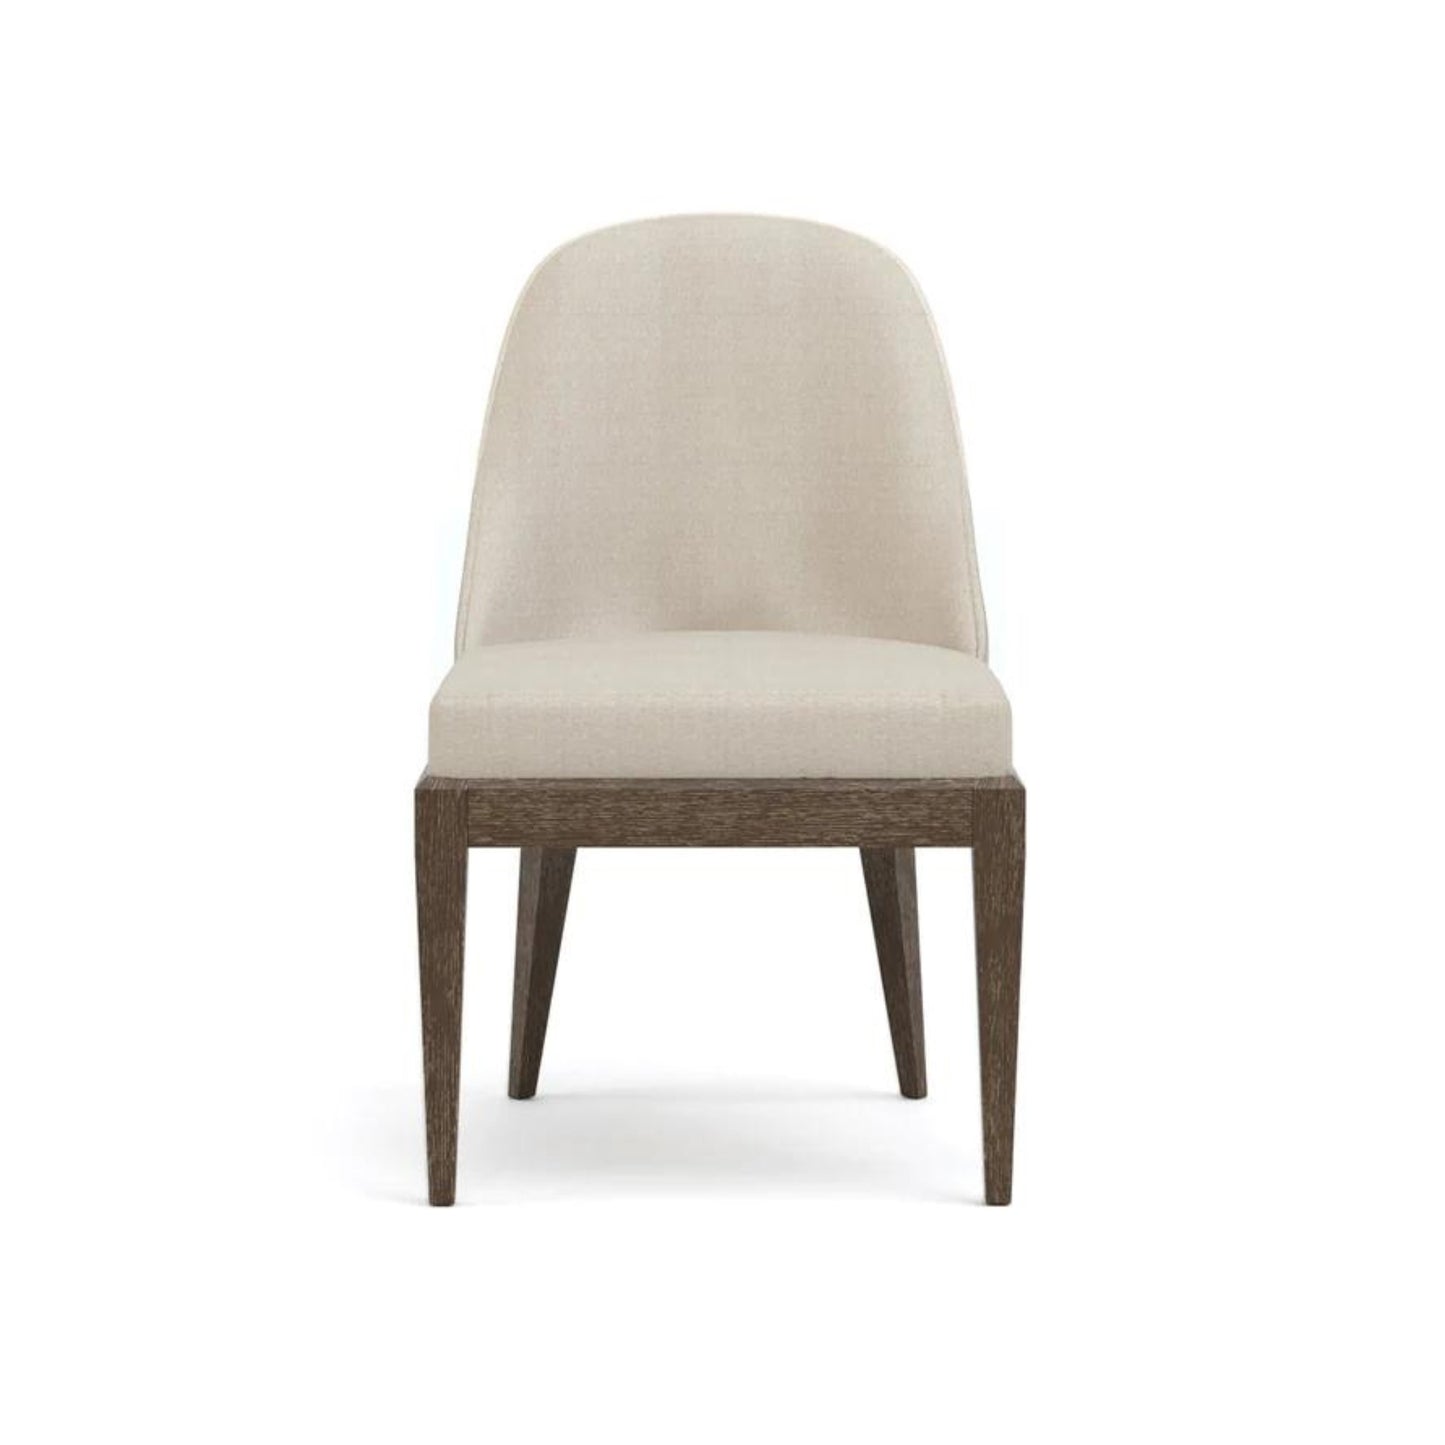 Maidstone Upholstered Side Chair